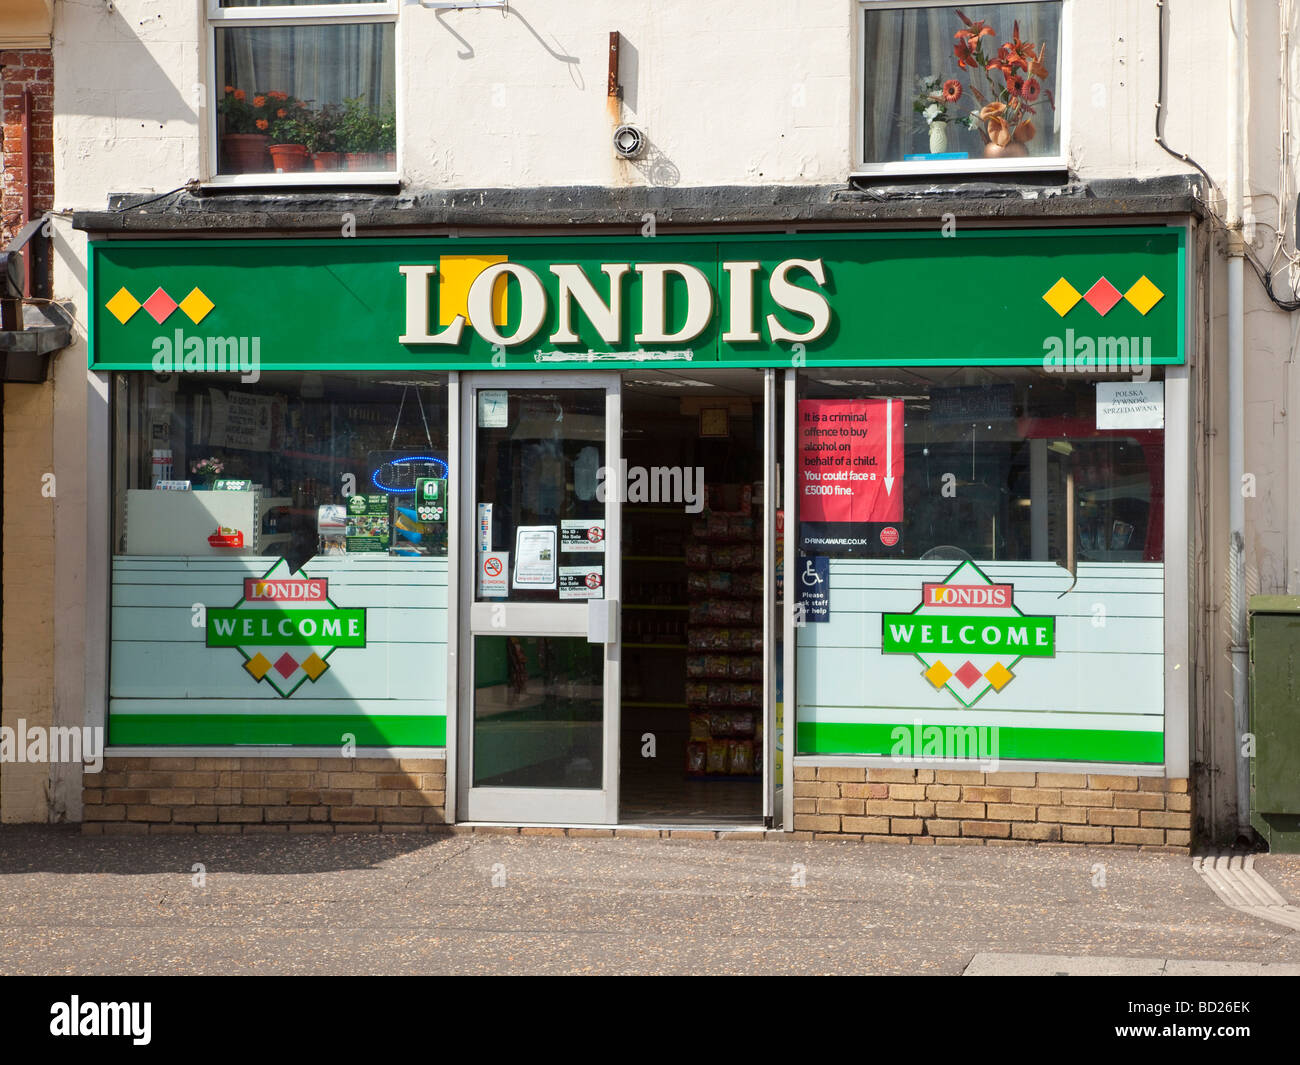 Londis convenience store Foto Stock